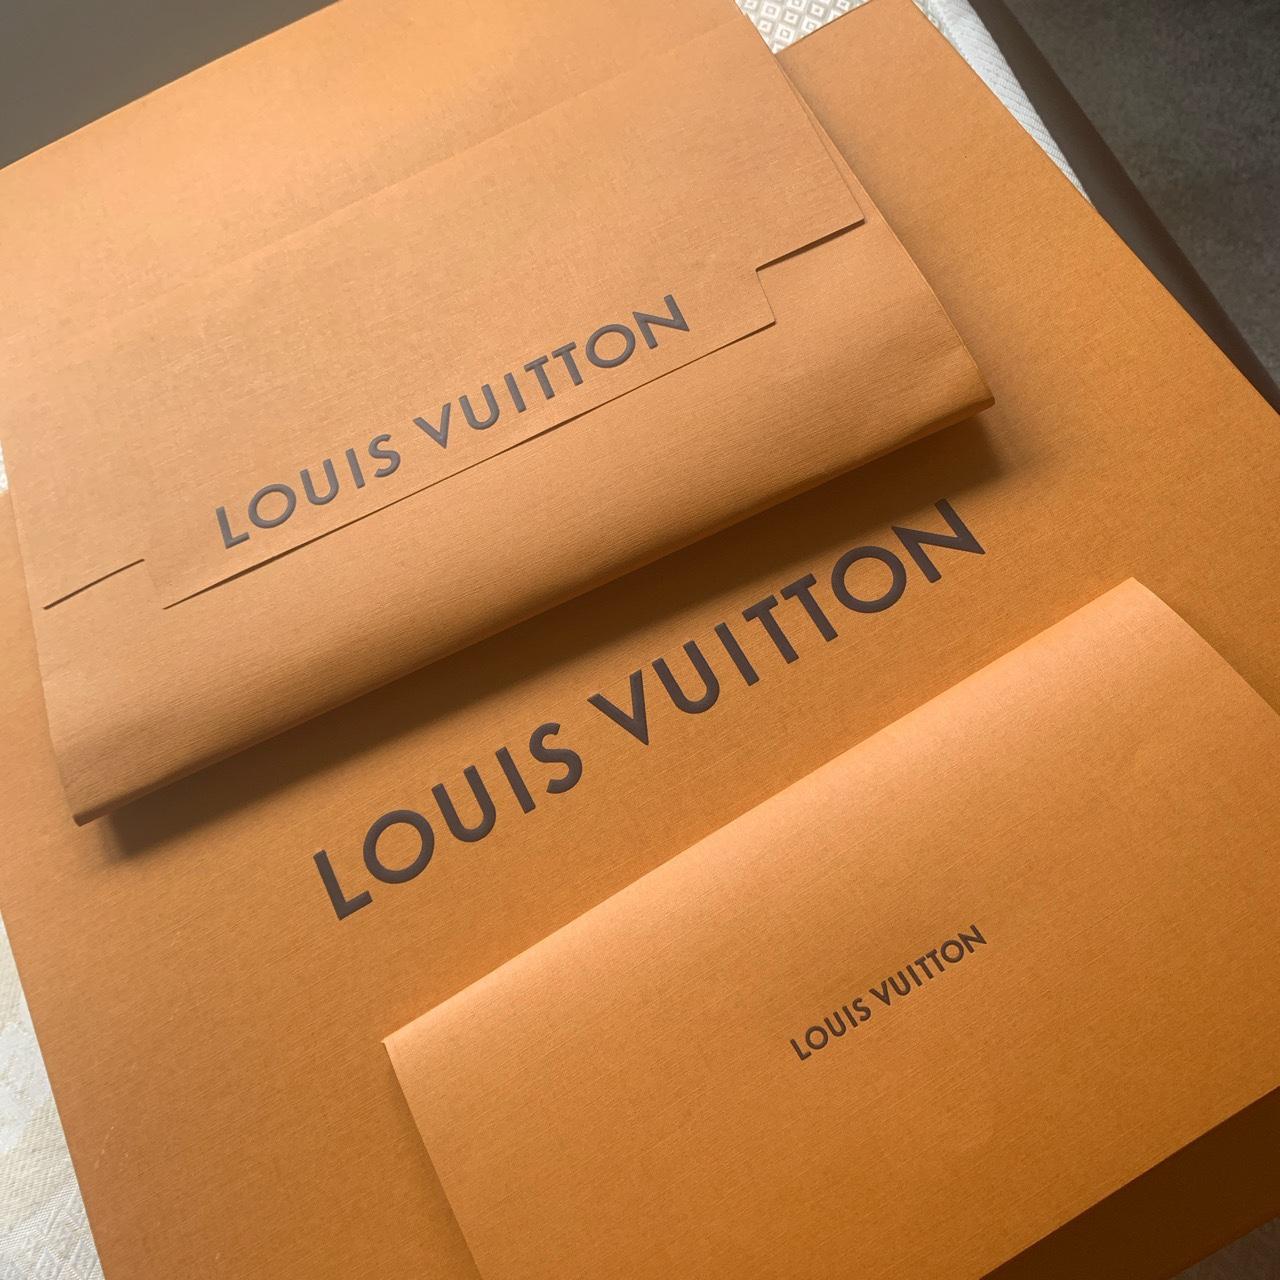 ❌SOLD❌ Authentic Louis Vuitton Alma PM with scarf. - Depop